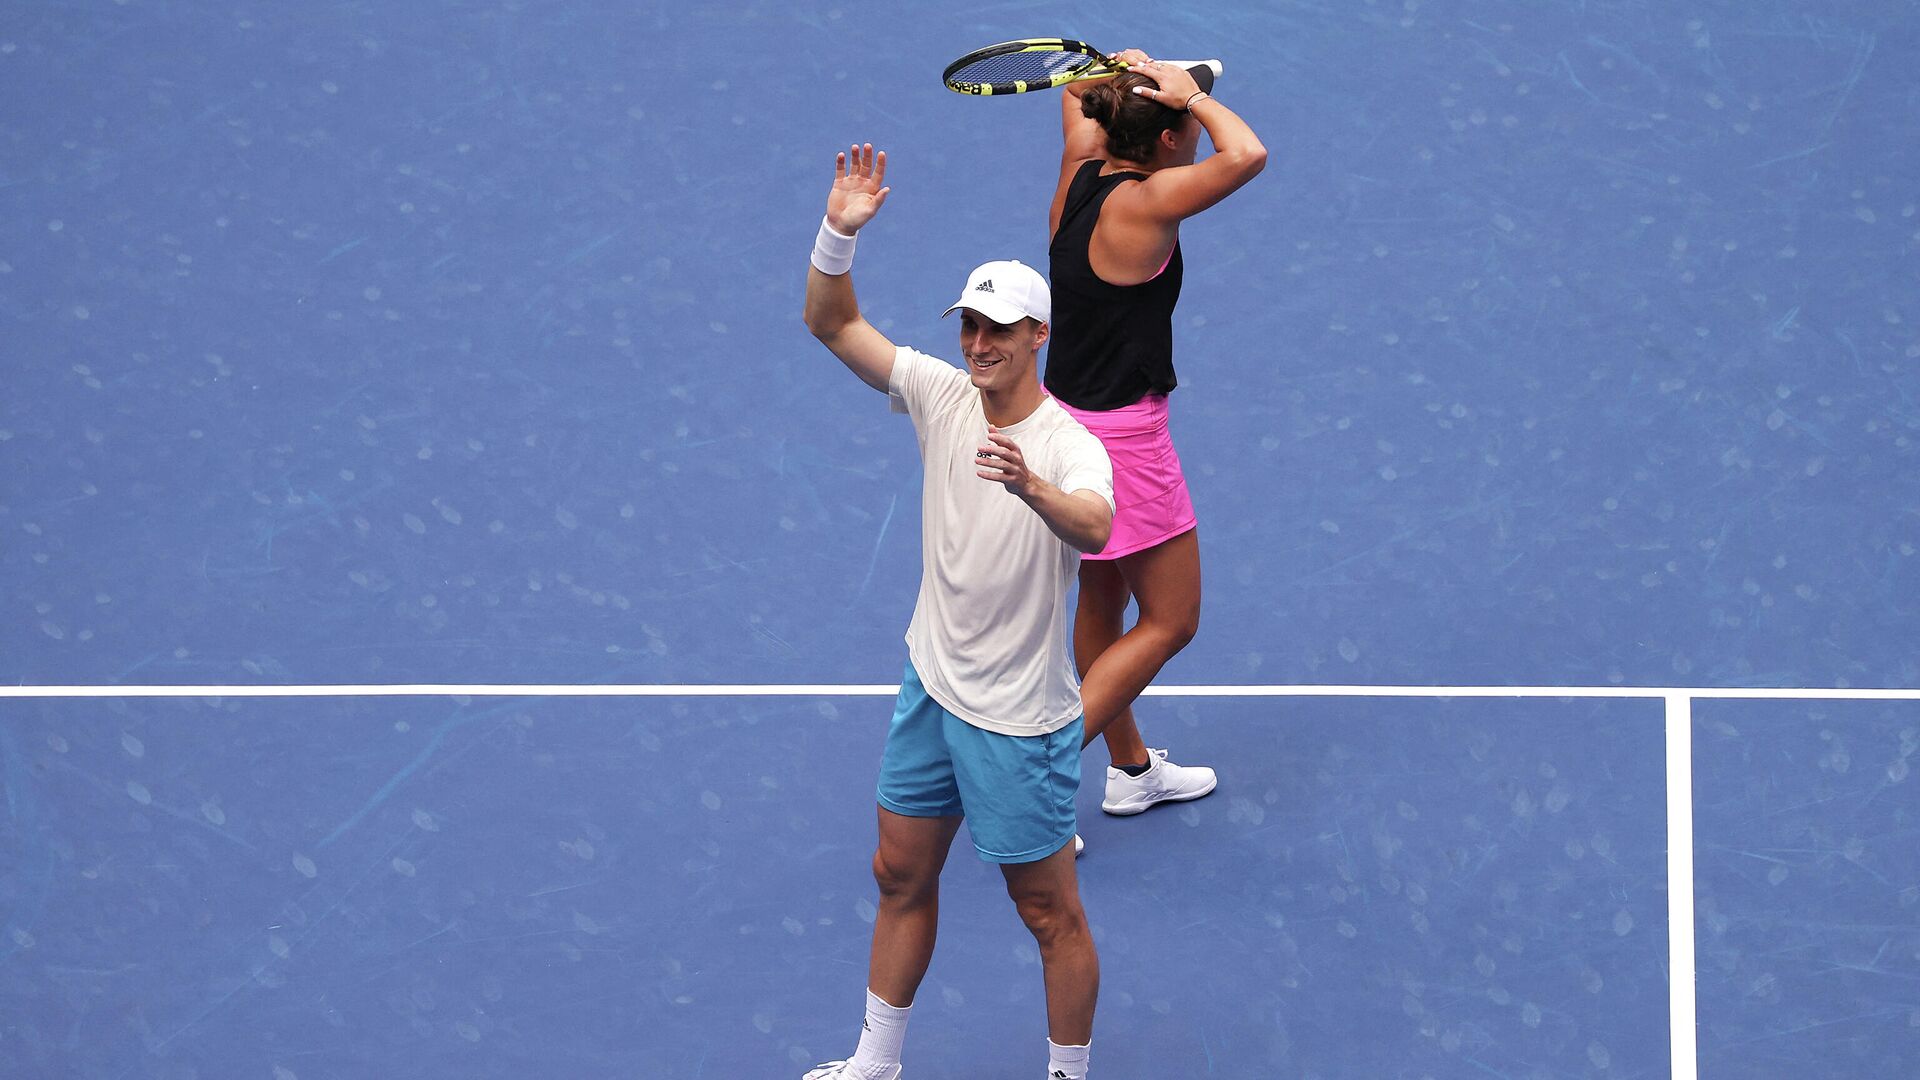 NEW YORK, NEW YORK - SEPTEMBER 11: Desirae Krawczyk (top) of the United States and Joe Salisbury (bottom) of Great Britain react after defeating Giuliana Olmos of Mexico and Marcelo Arevalo of El Salvador in their Mixed Doubles final match on Day Thirteen of the 2021 US Open at the USTA Billie Jean King National Tennis Center on September 11, 2021 in the Flushing neighborhood of the Queens borough of New York City.   Al Bello/Getty Images/AFP (Photo by AL BELLO / GETTY IMAGES NORTH AMERICA / Getty Images via AFP) - РИА Новости, 1920, 11.09.2021